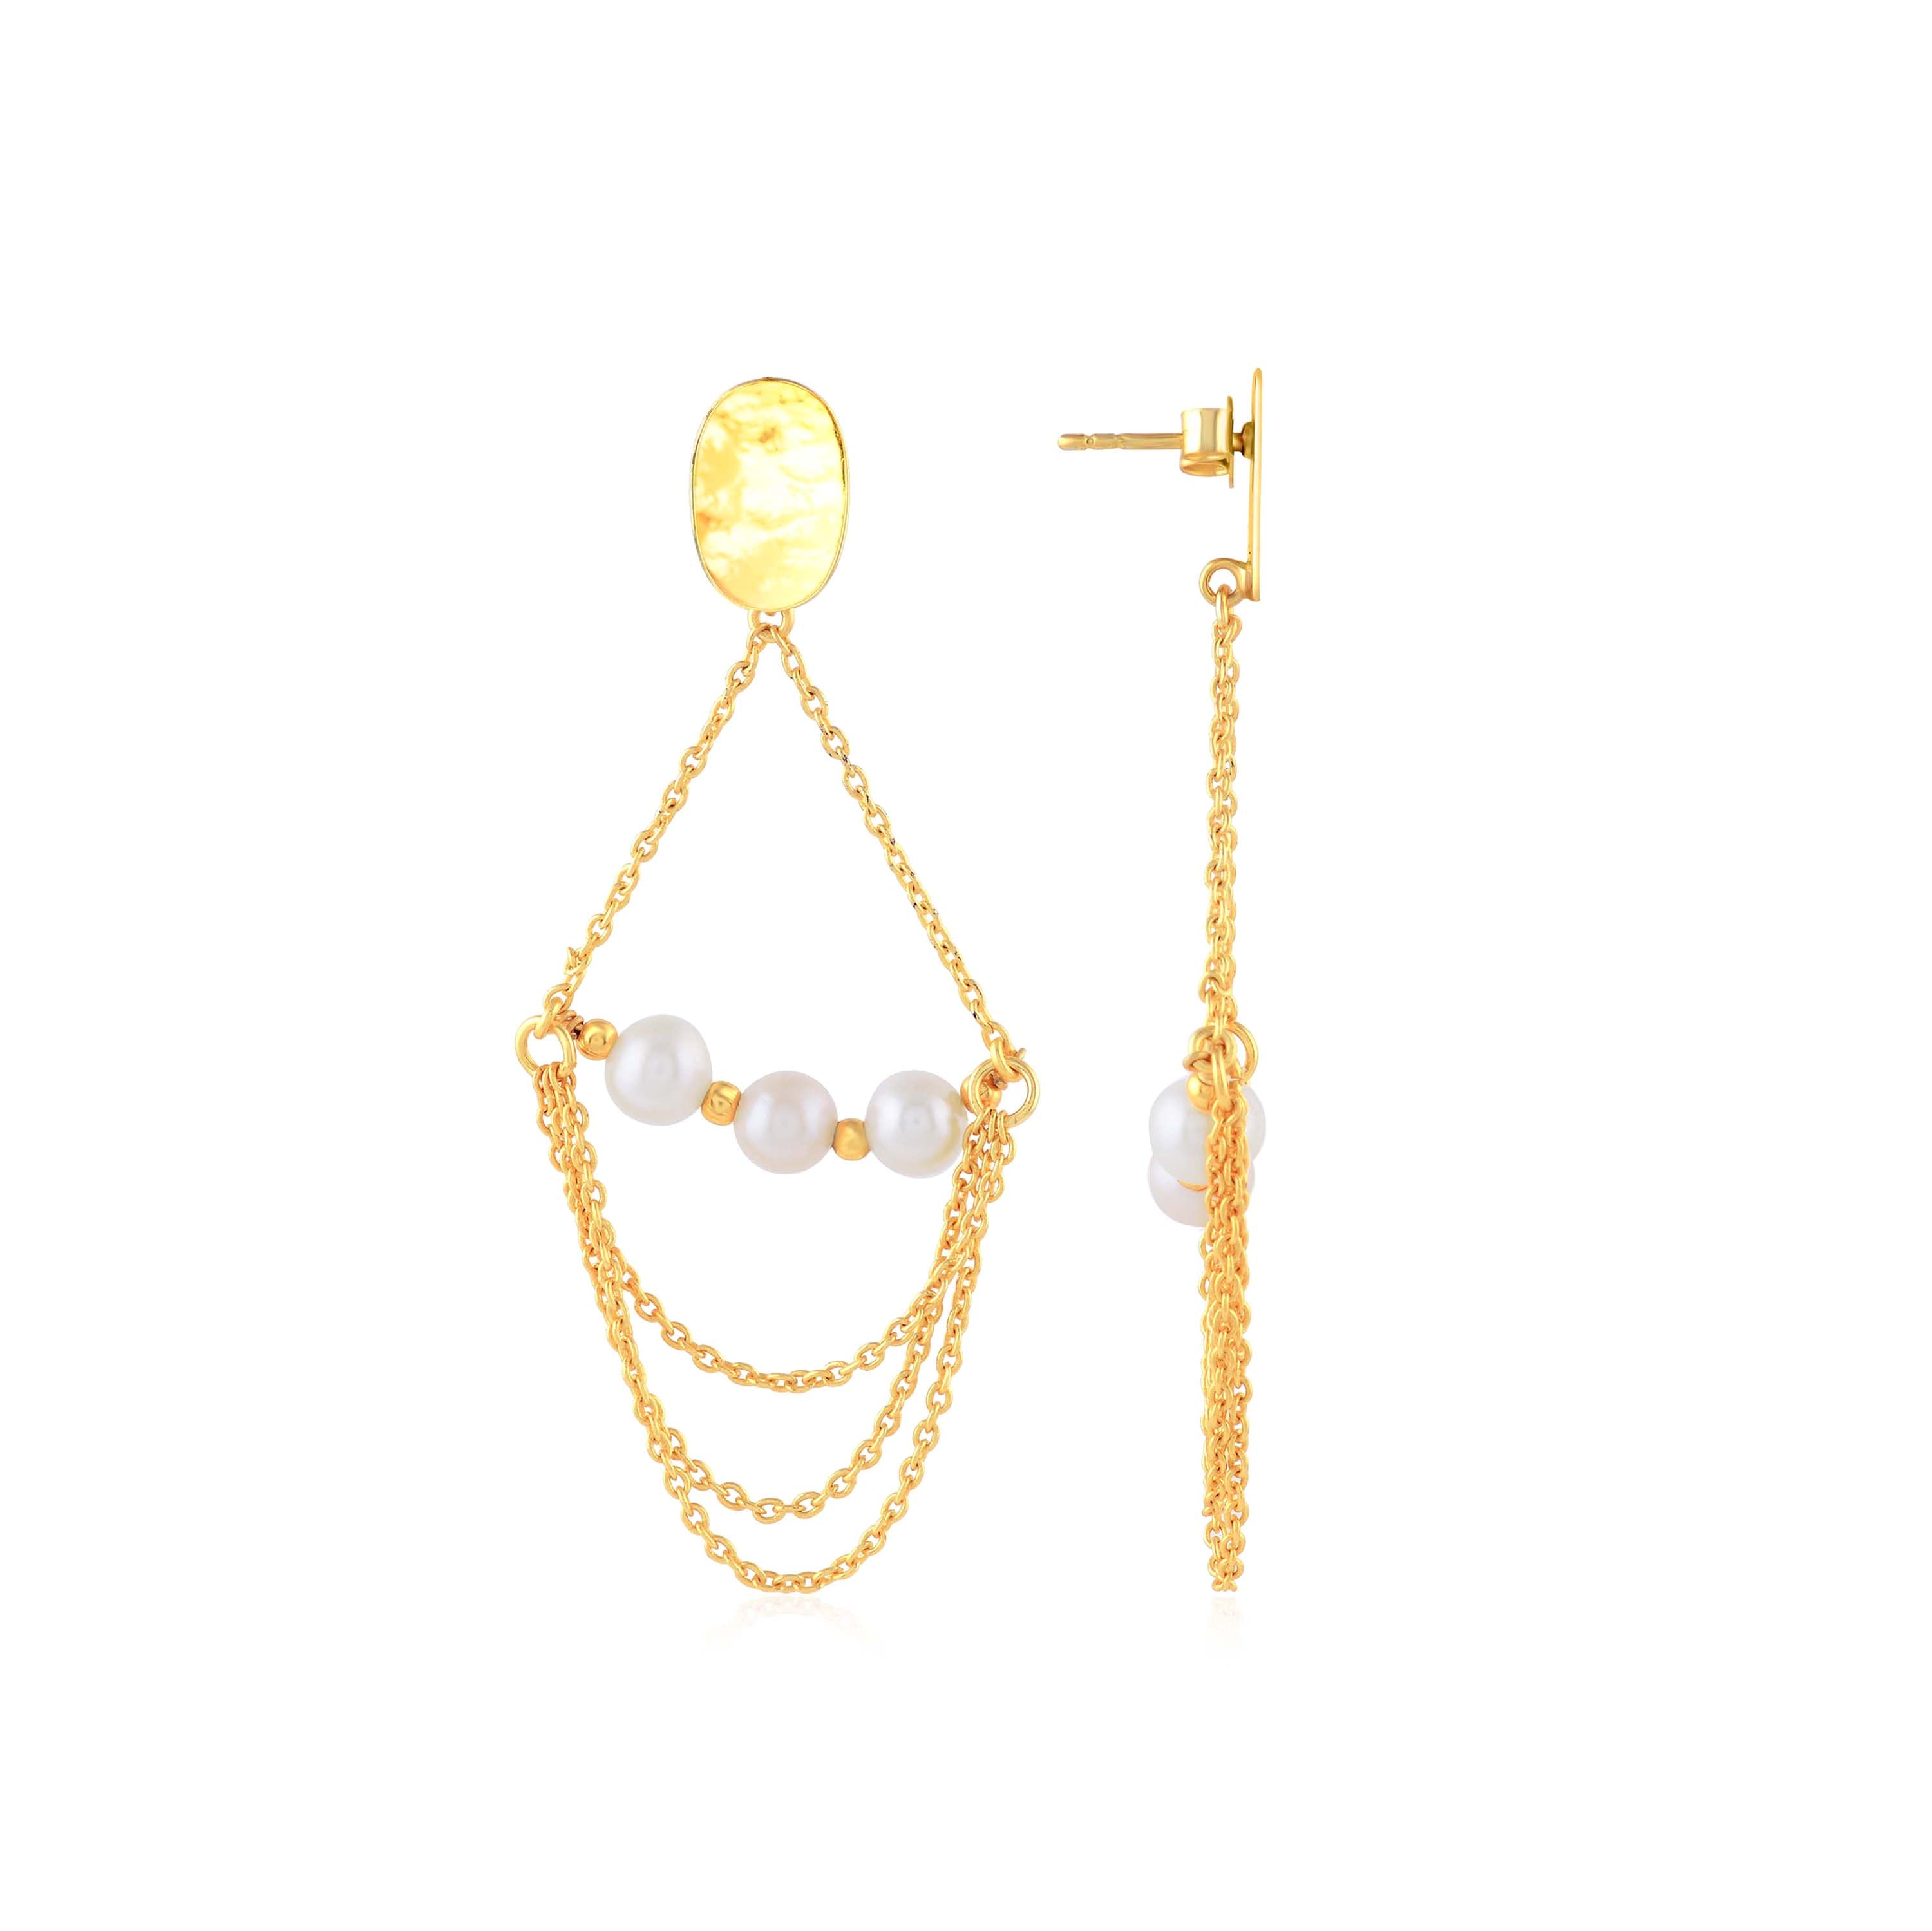 Gold-threaded Pearl Dangler Earrings – A Luxurious Statement